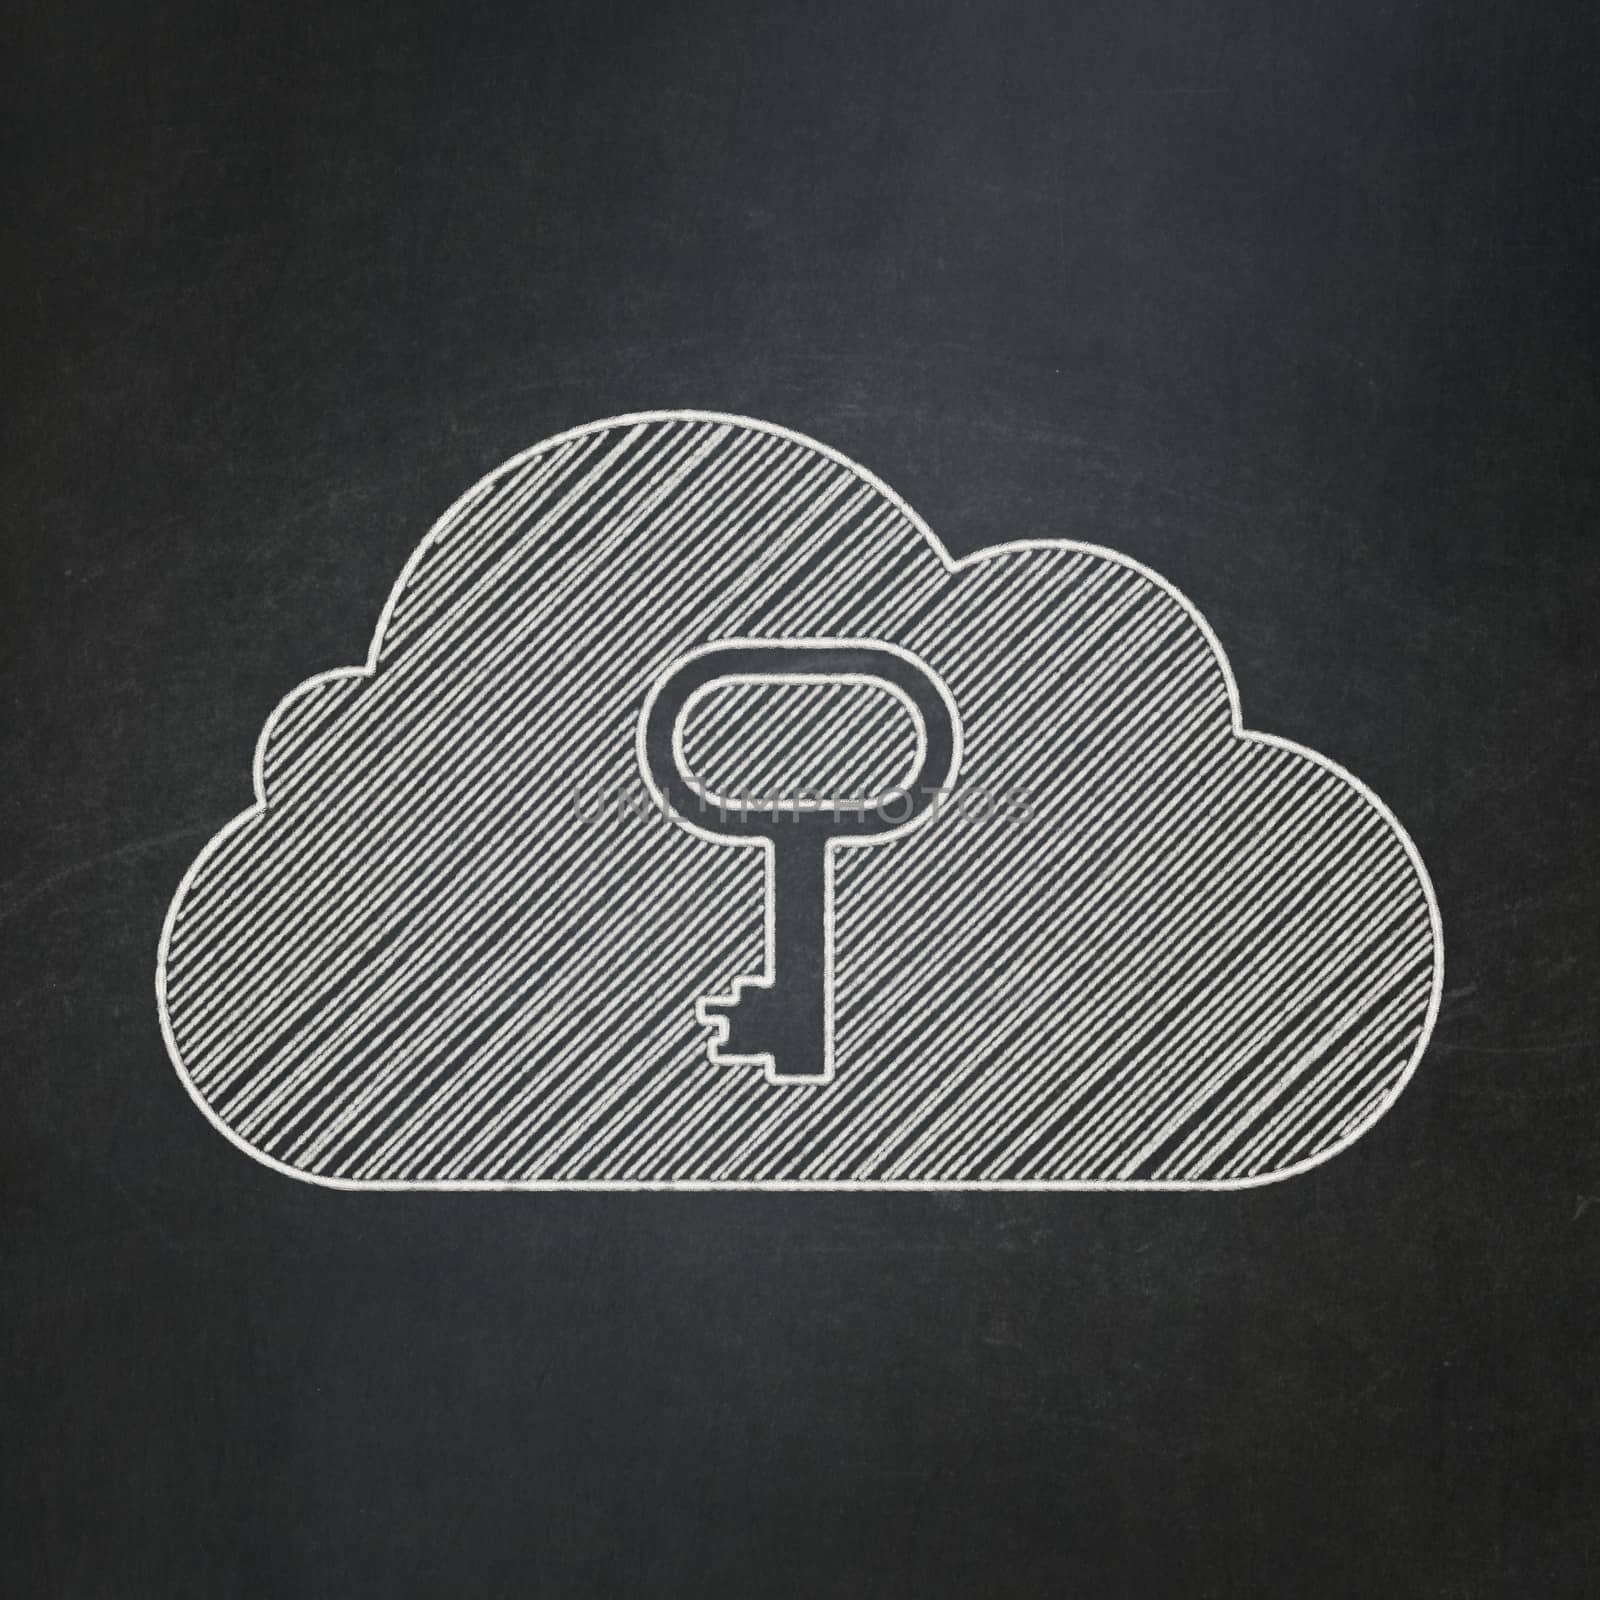 Cloud technology concept: Cloud With Key icon on Black chalkboard background, 3d render